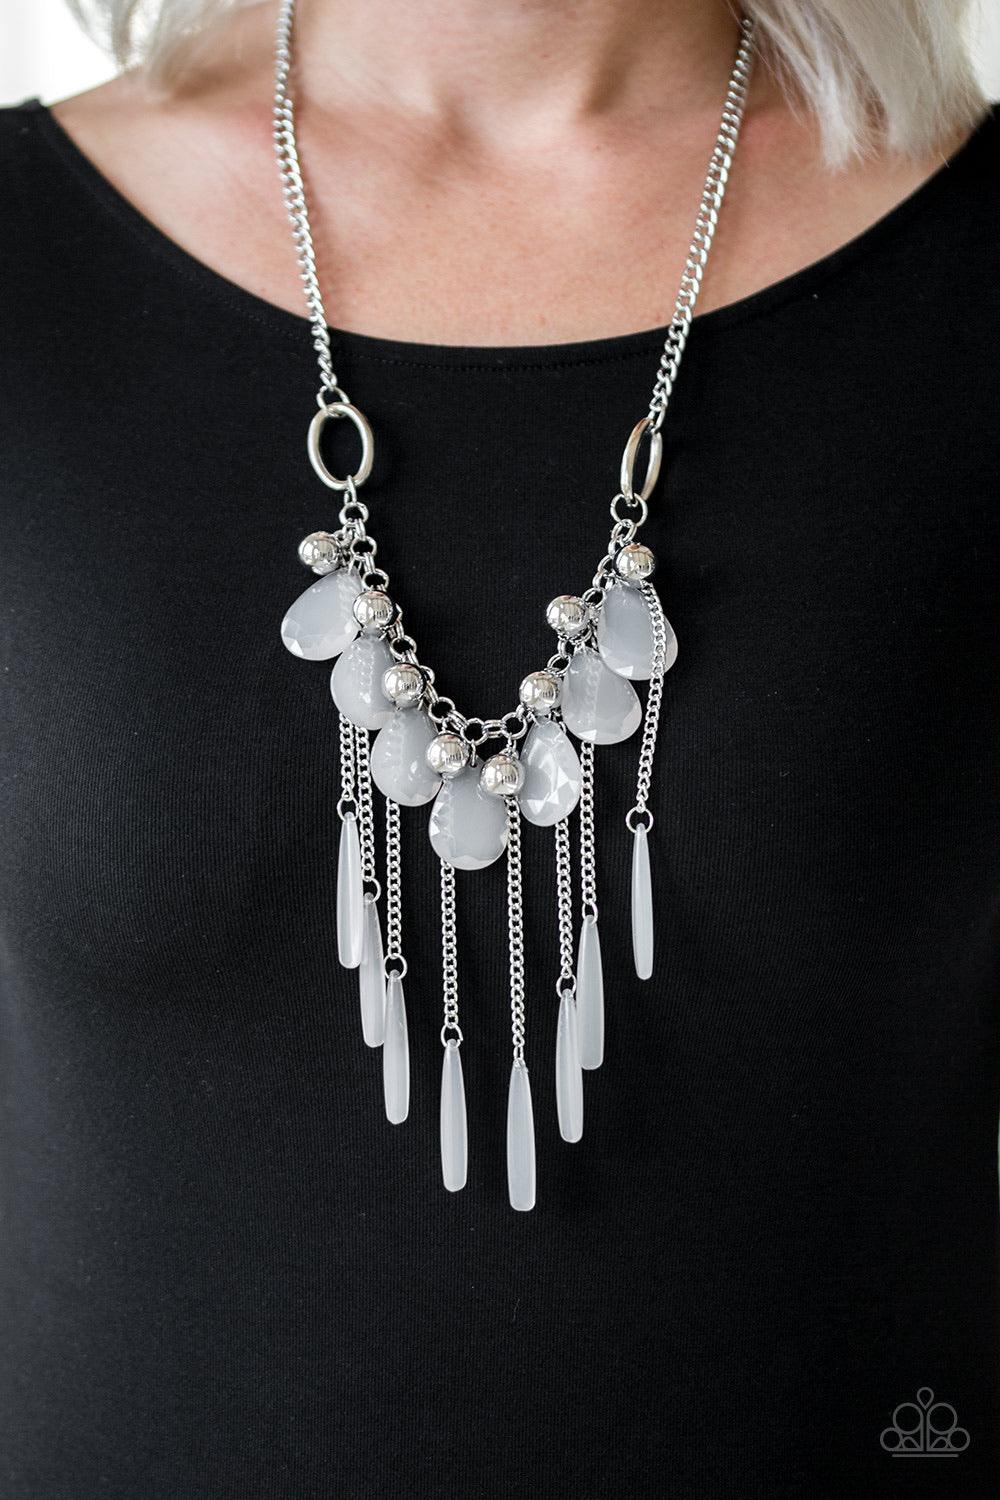 Paparazzi Accessories Roaring Riviera - Silver Shiny silver beads and faceted cloudy teardrops drip from the bottom of a shimmery silver chain below the collar. Flared cloudy beading swings from the bottoms of free-falling silver chains, creating a vivaci